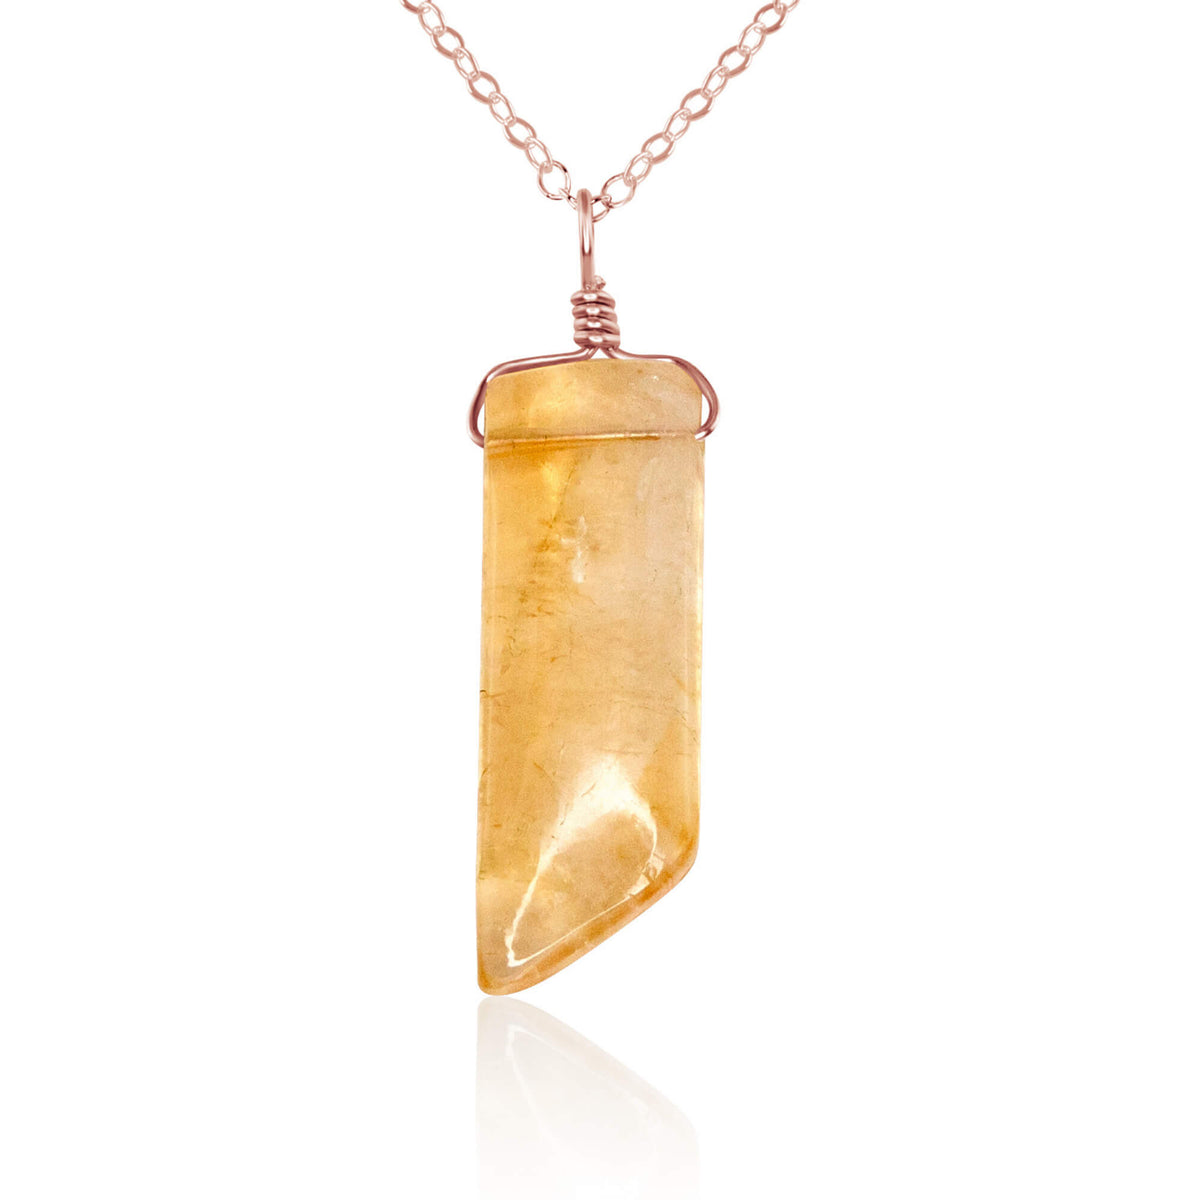 Smooth Point Pendant Necklace - Citrine - 14K Rose Gold Fill - Luna Tide Handmade Jewellery